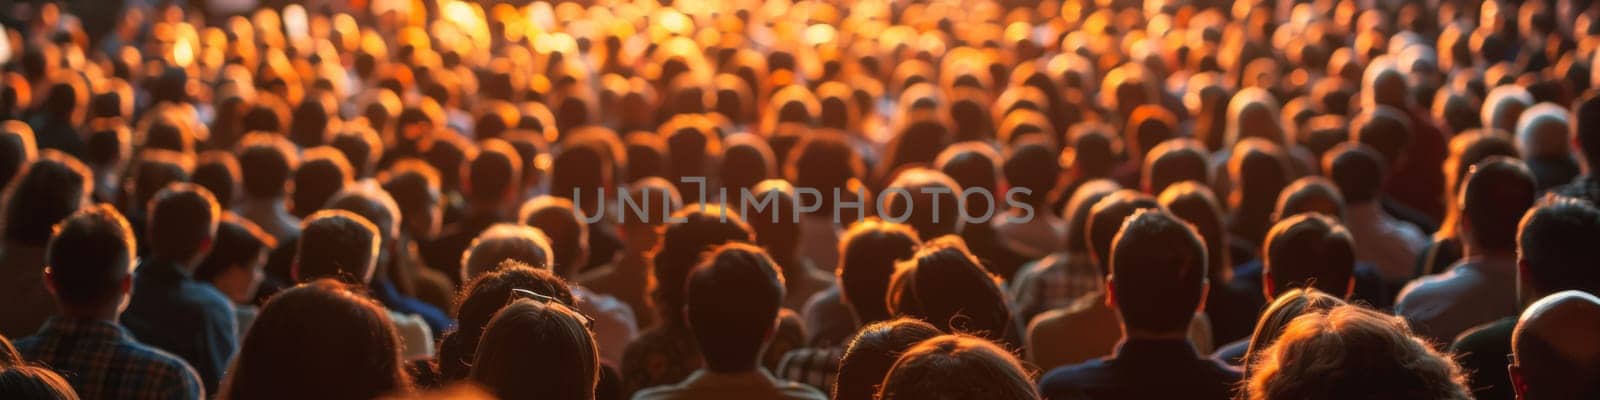 A large group of people standing in a crowd with their backs to the camera, AI by starush